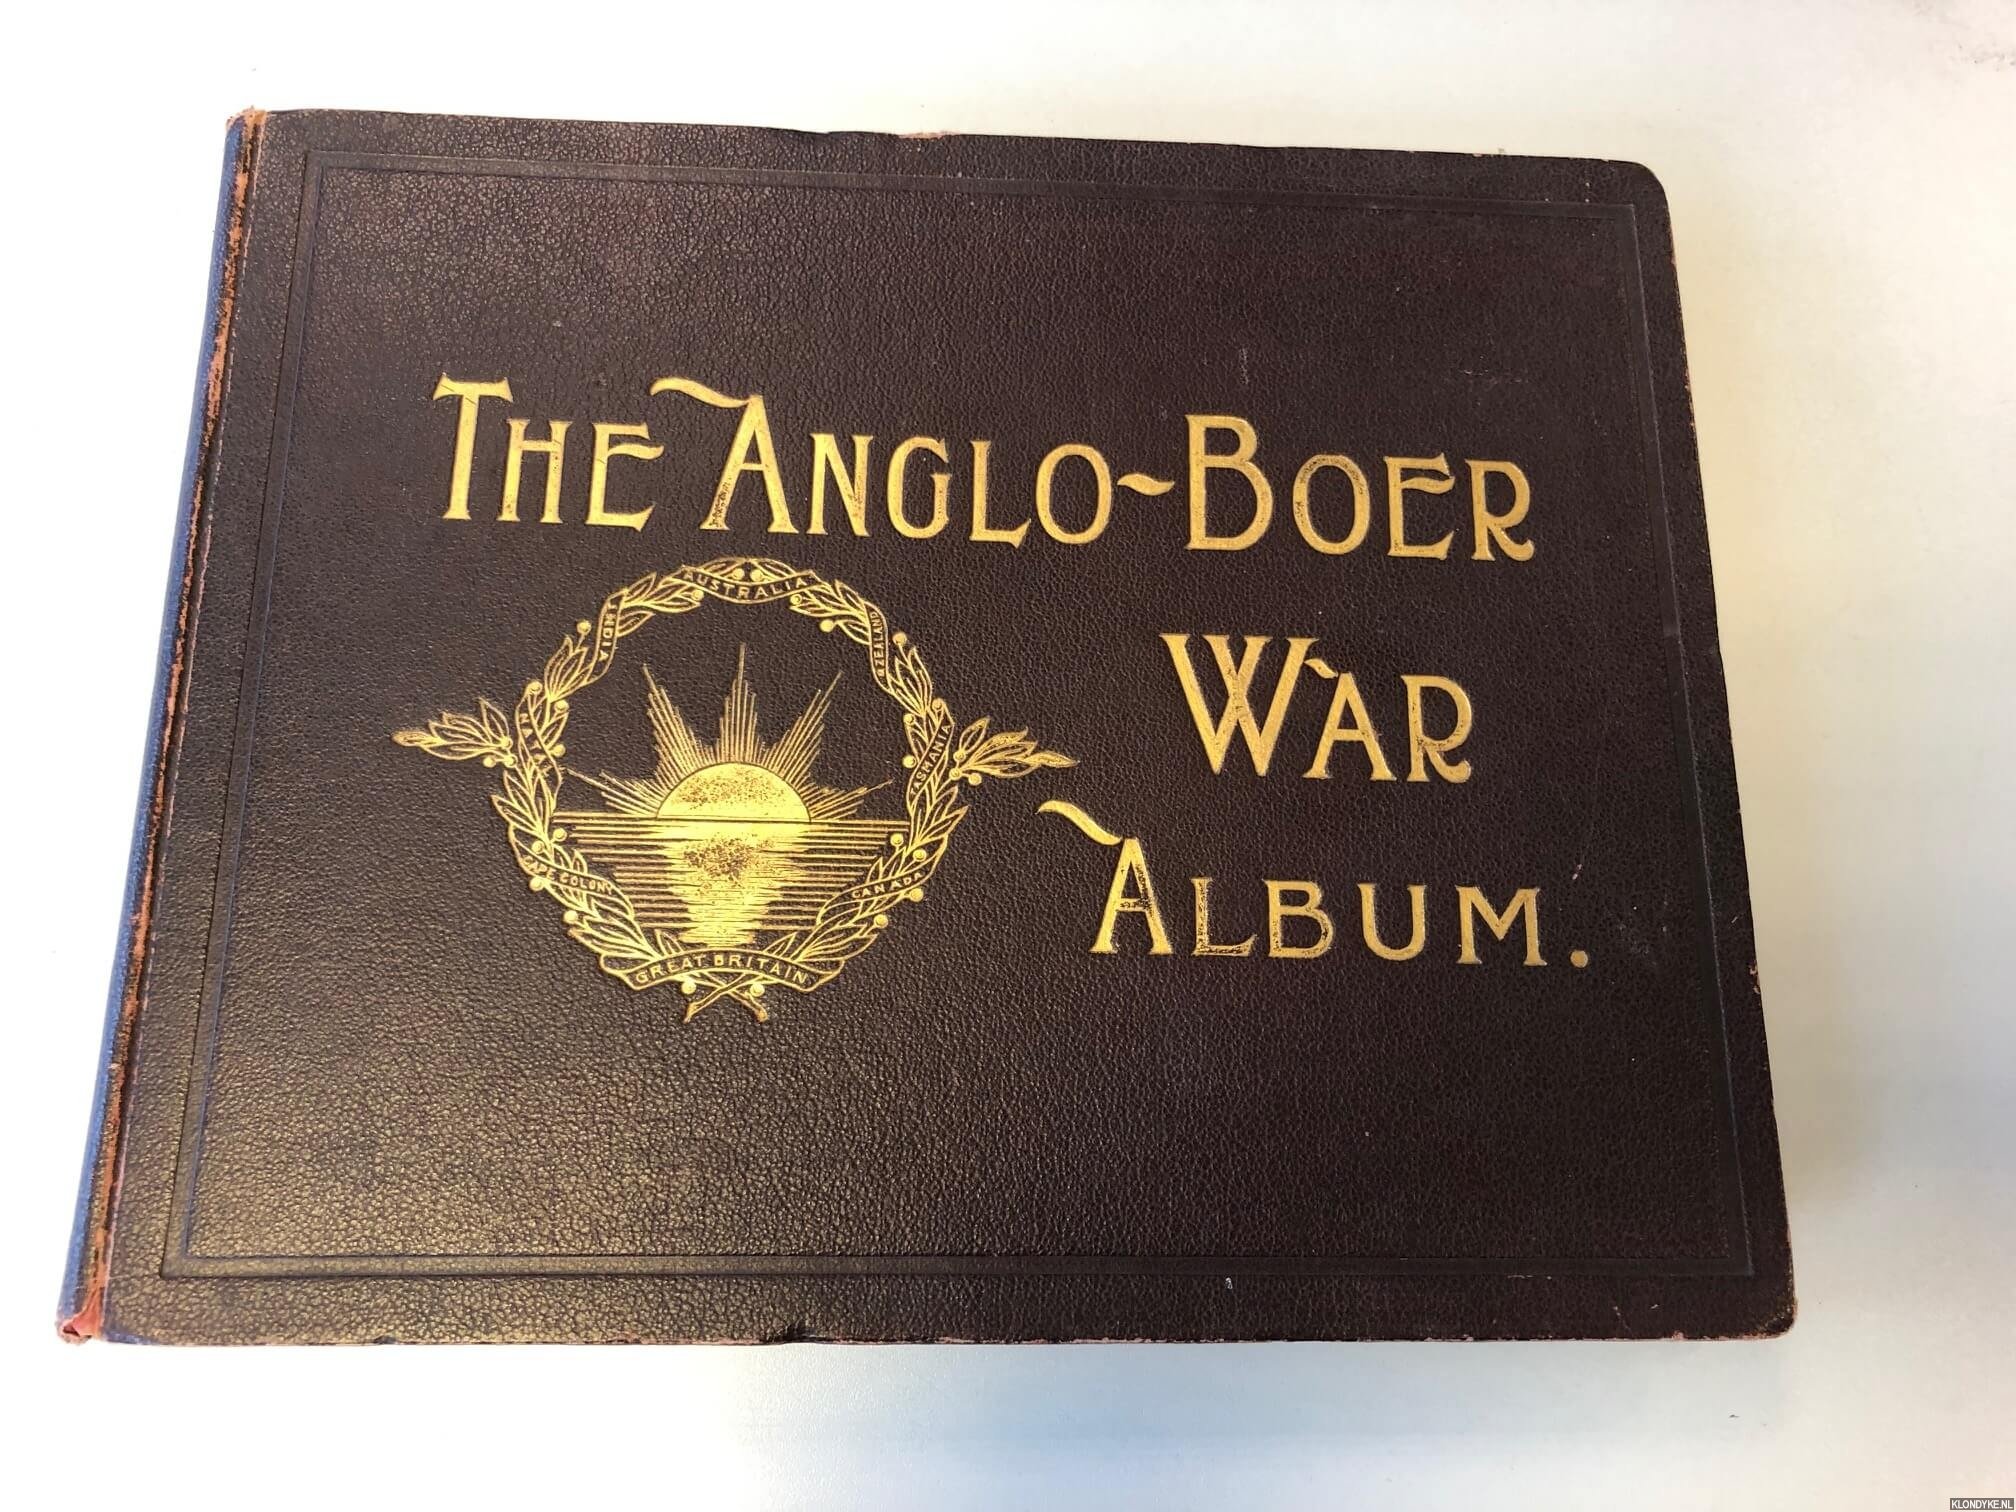 Edwards, Dennis - The Anglo-Boer War, October 11th, 1899 - May 31st, 1902. An Album of upwards of Five Hundred Photographic Engravings. A Picture Record of the Movements of the Britsh, Colonial, and Boer Forces engaged in the Conflict